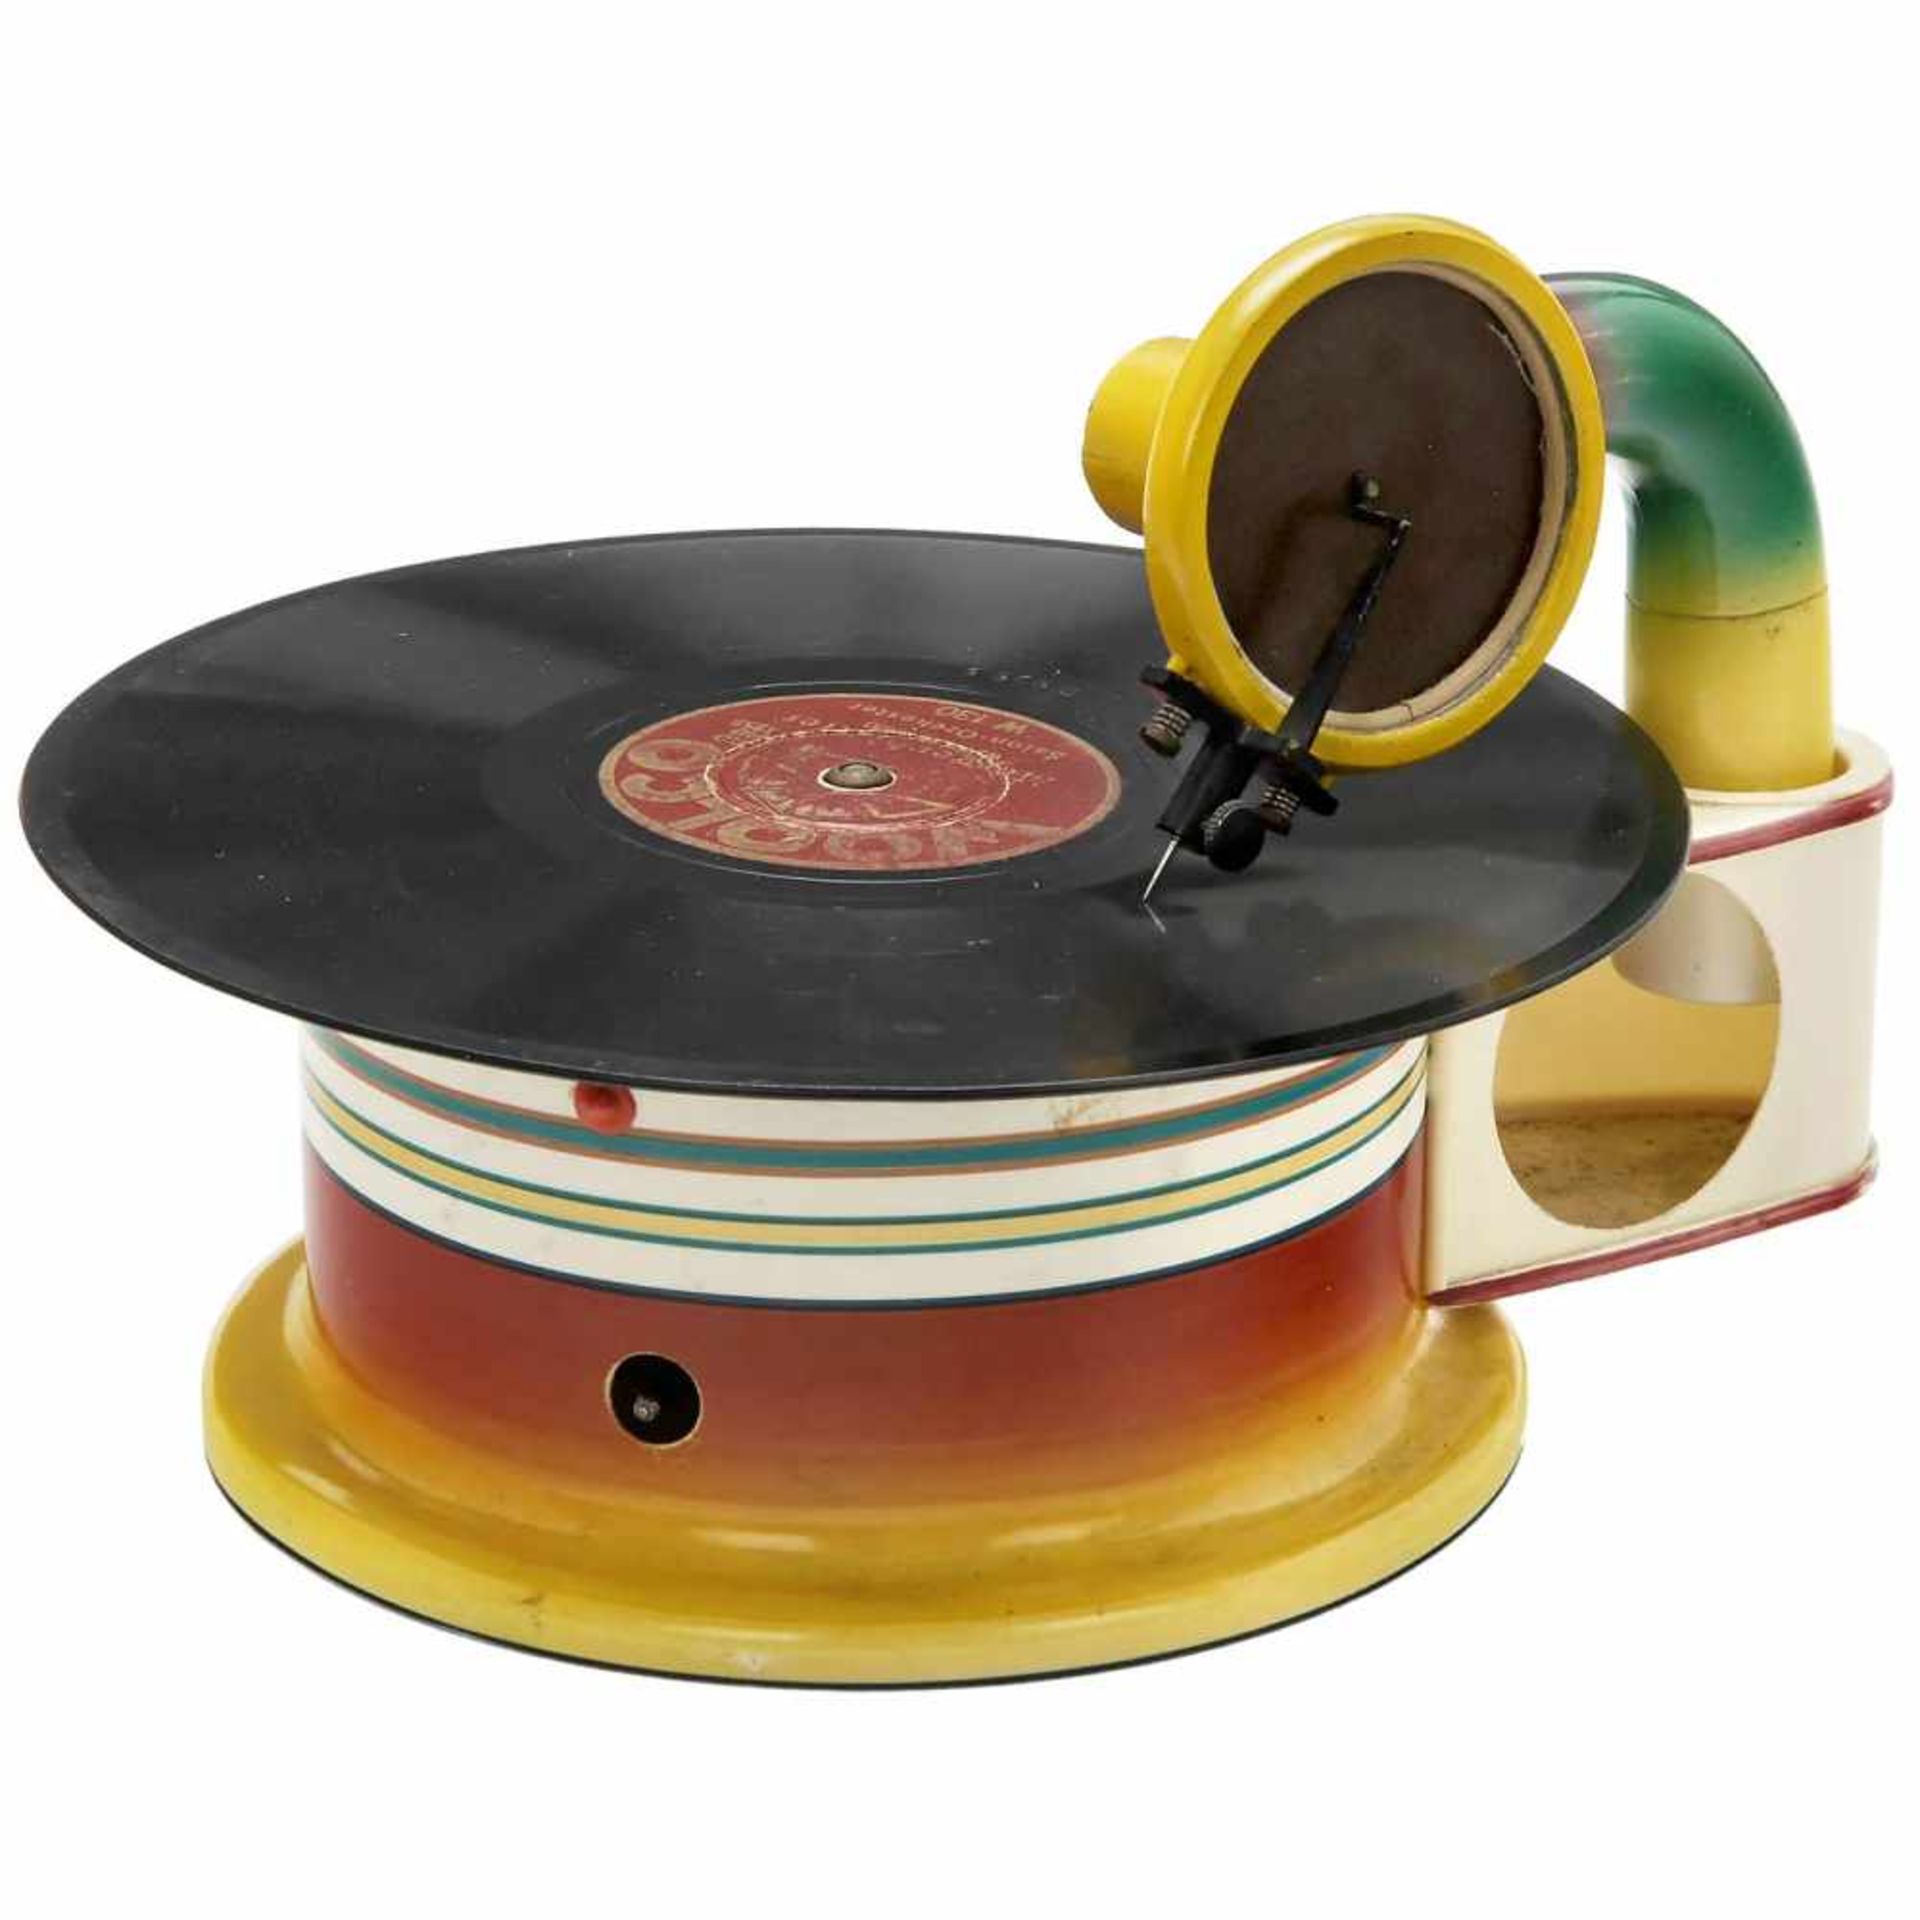 Wackerphon Toy Gramophone, c. 1935Germany, celluloid case, spring motor (working), Ø only 5 ¼ in.